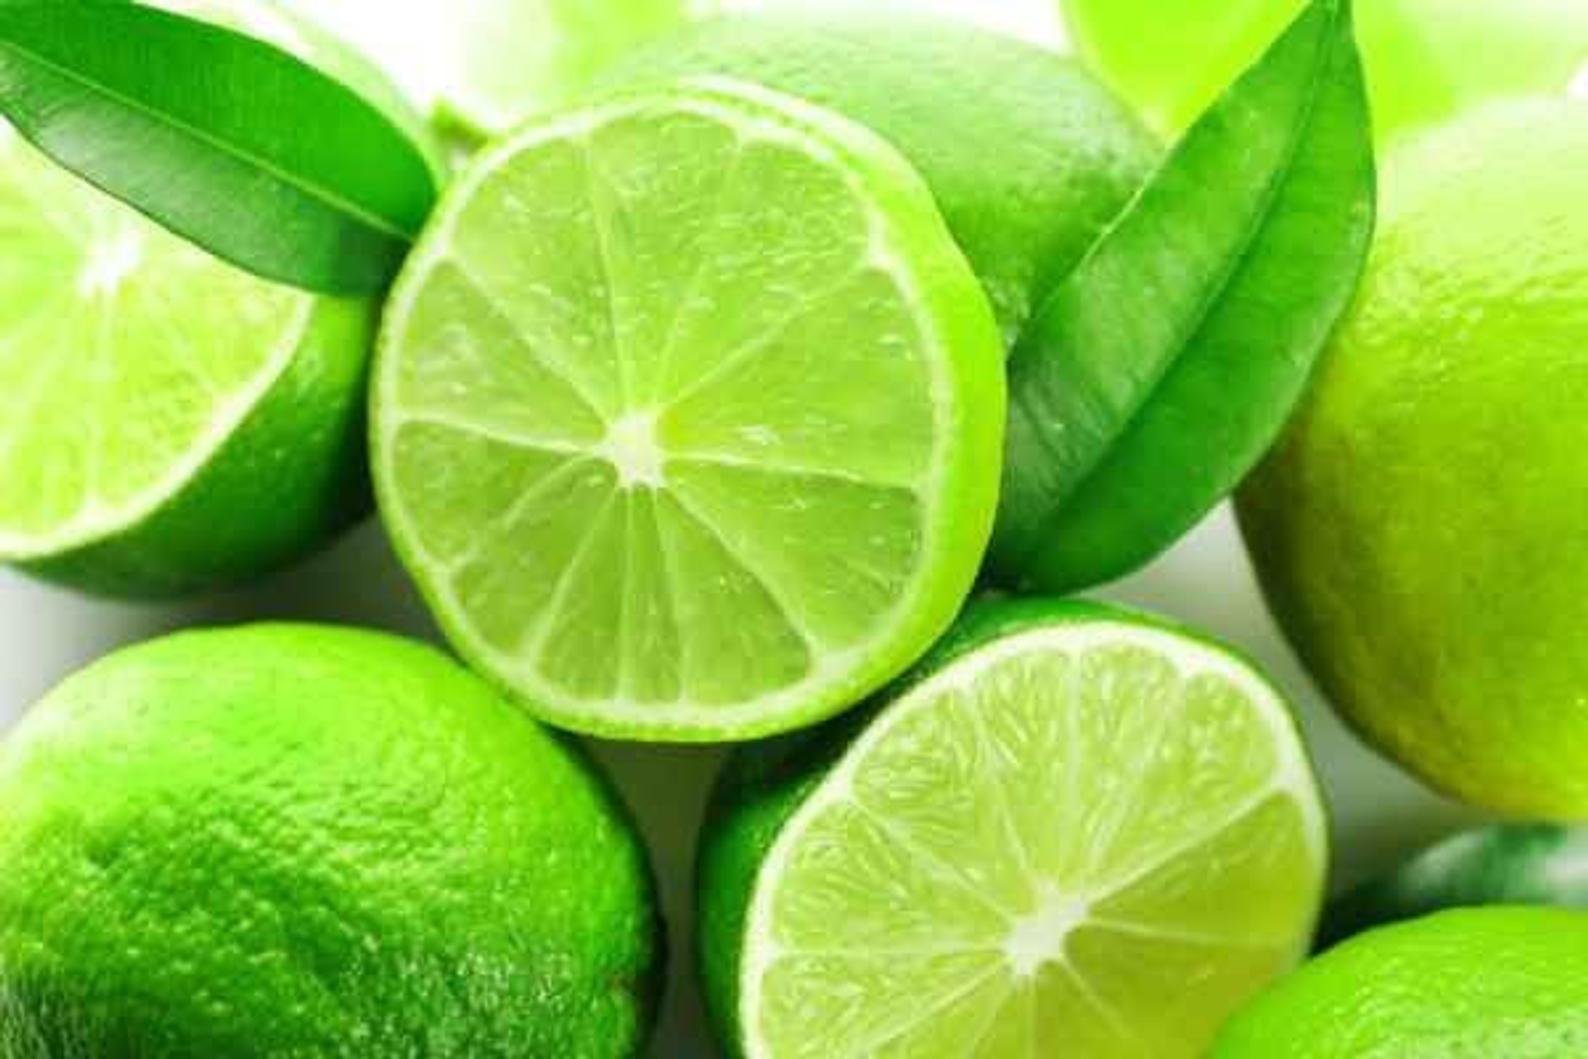 Green Gems: The Lure of Organic Limes